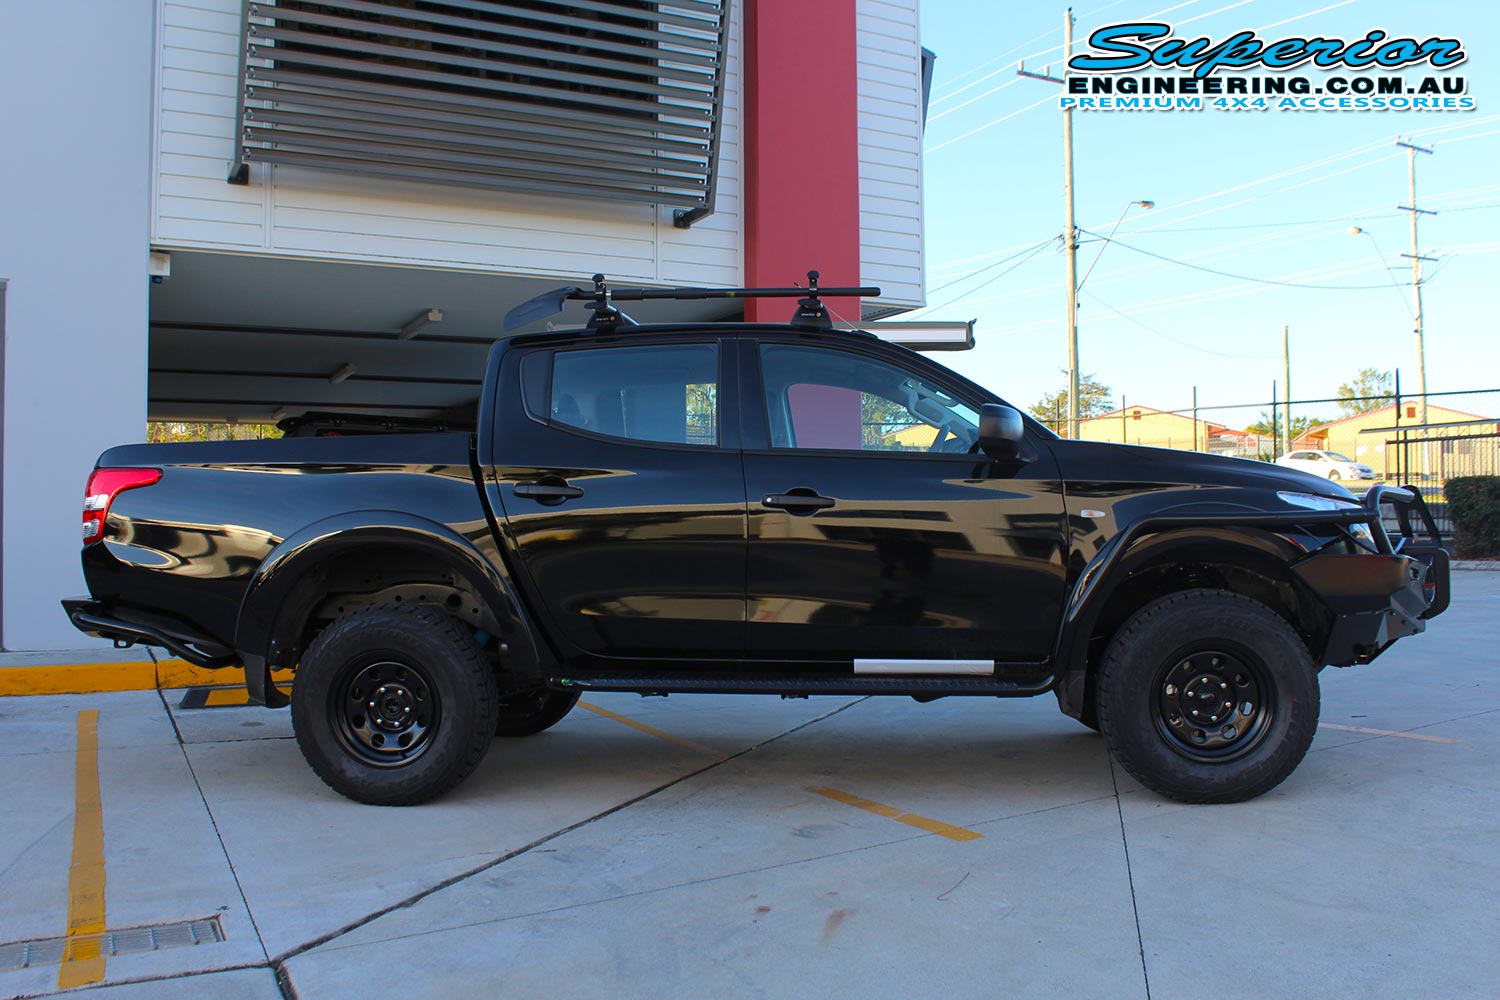 Right side view of a black Mitsubishi MQ Triton fitted with a 40mm Bilstein lift kit and Ironman 4x4 Accessories